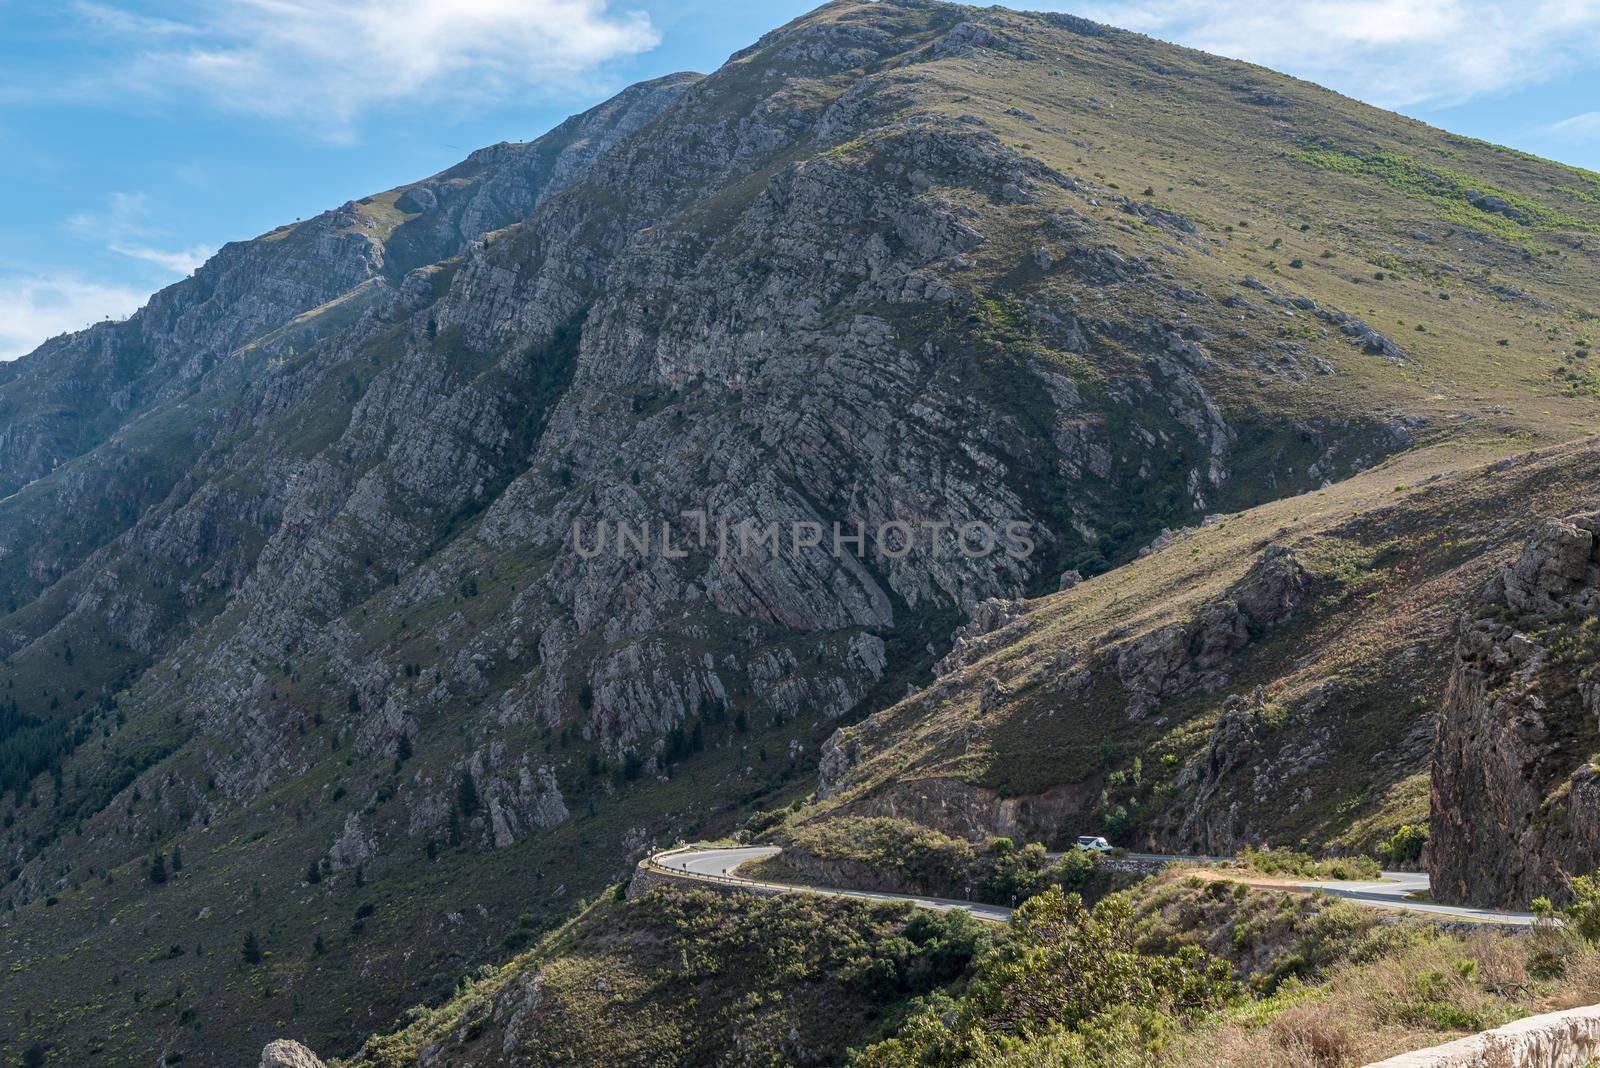 View of the Franschhoek Pass in the Western Cape Province. A vehicle is visible